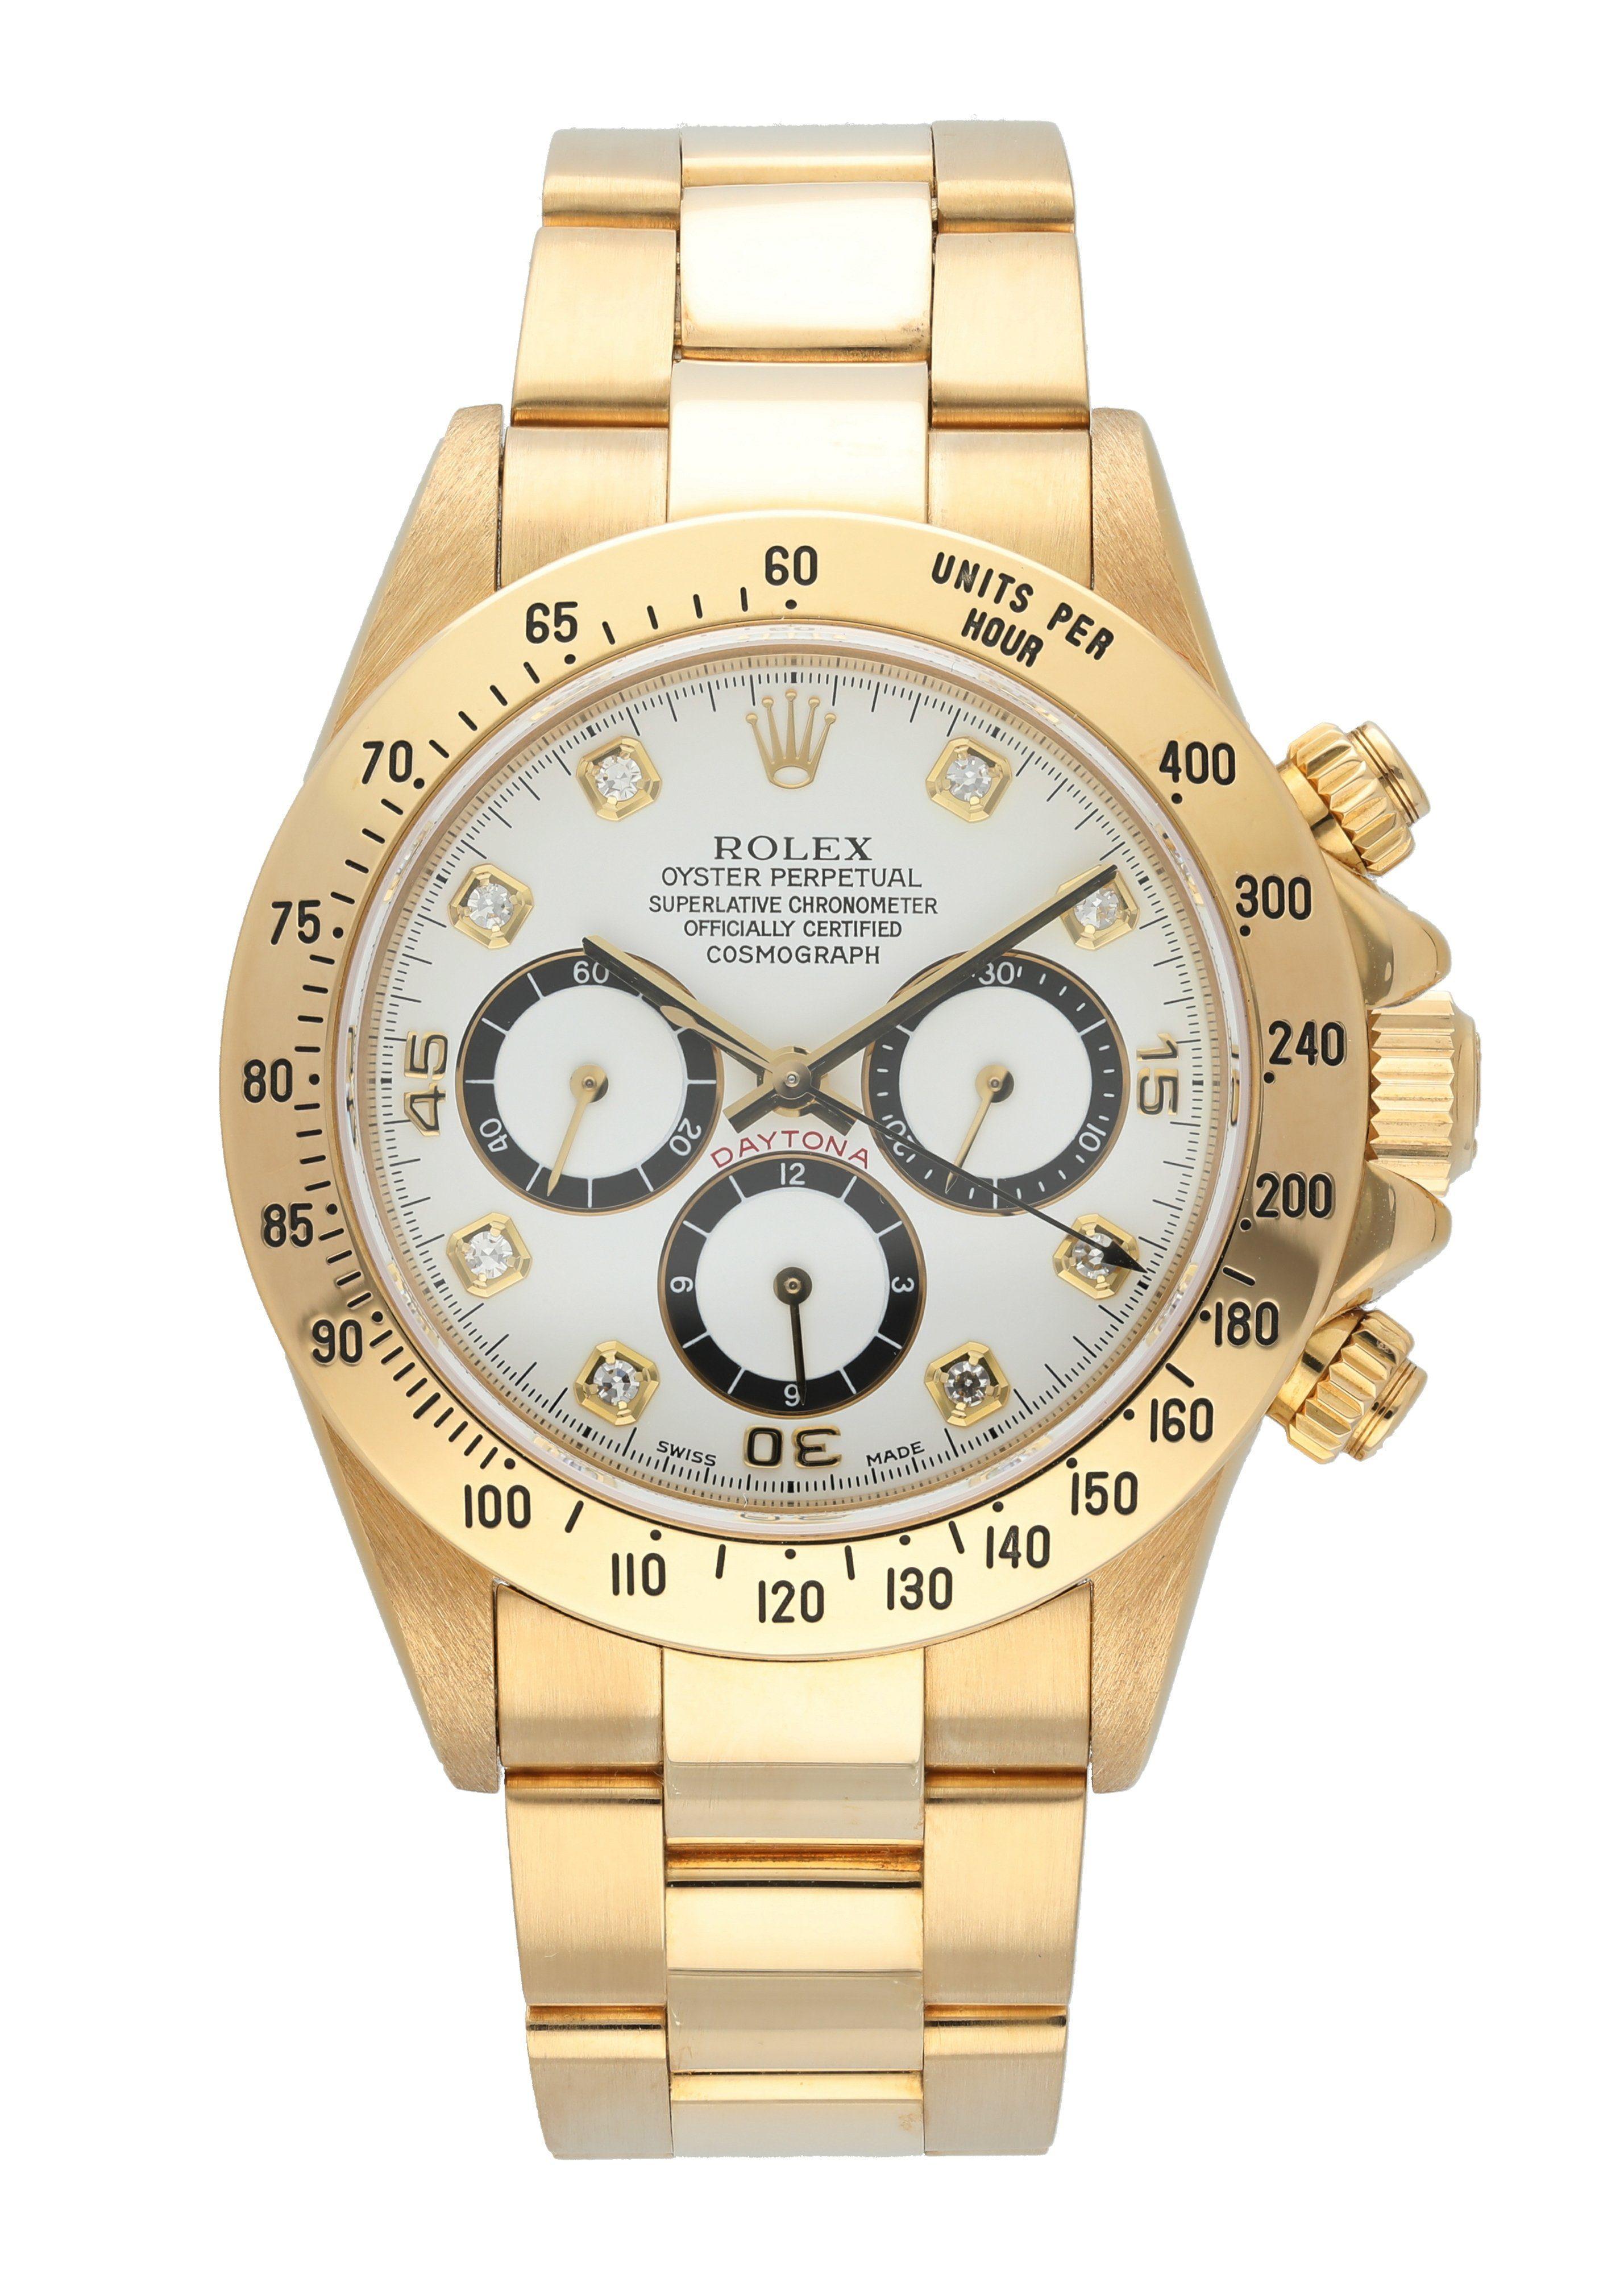 Rolex  Zenith Daytona Inverted Six 16528 Yellow Gold.
40mm 18k Yellow Gold case. 
Yellow Gold Tachyemter bezel. 
White dial with gold hands and factory set diamond hour markers. 
Rare INVERTED 6 dial
Yellow Gold Bracelet with Fold Over Clasp and